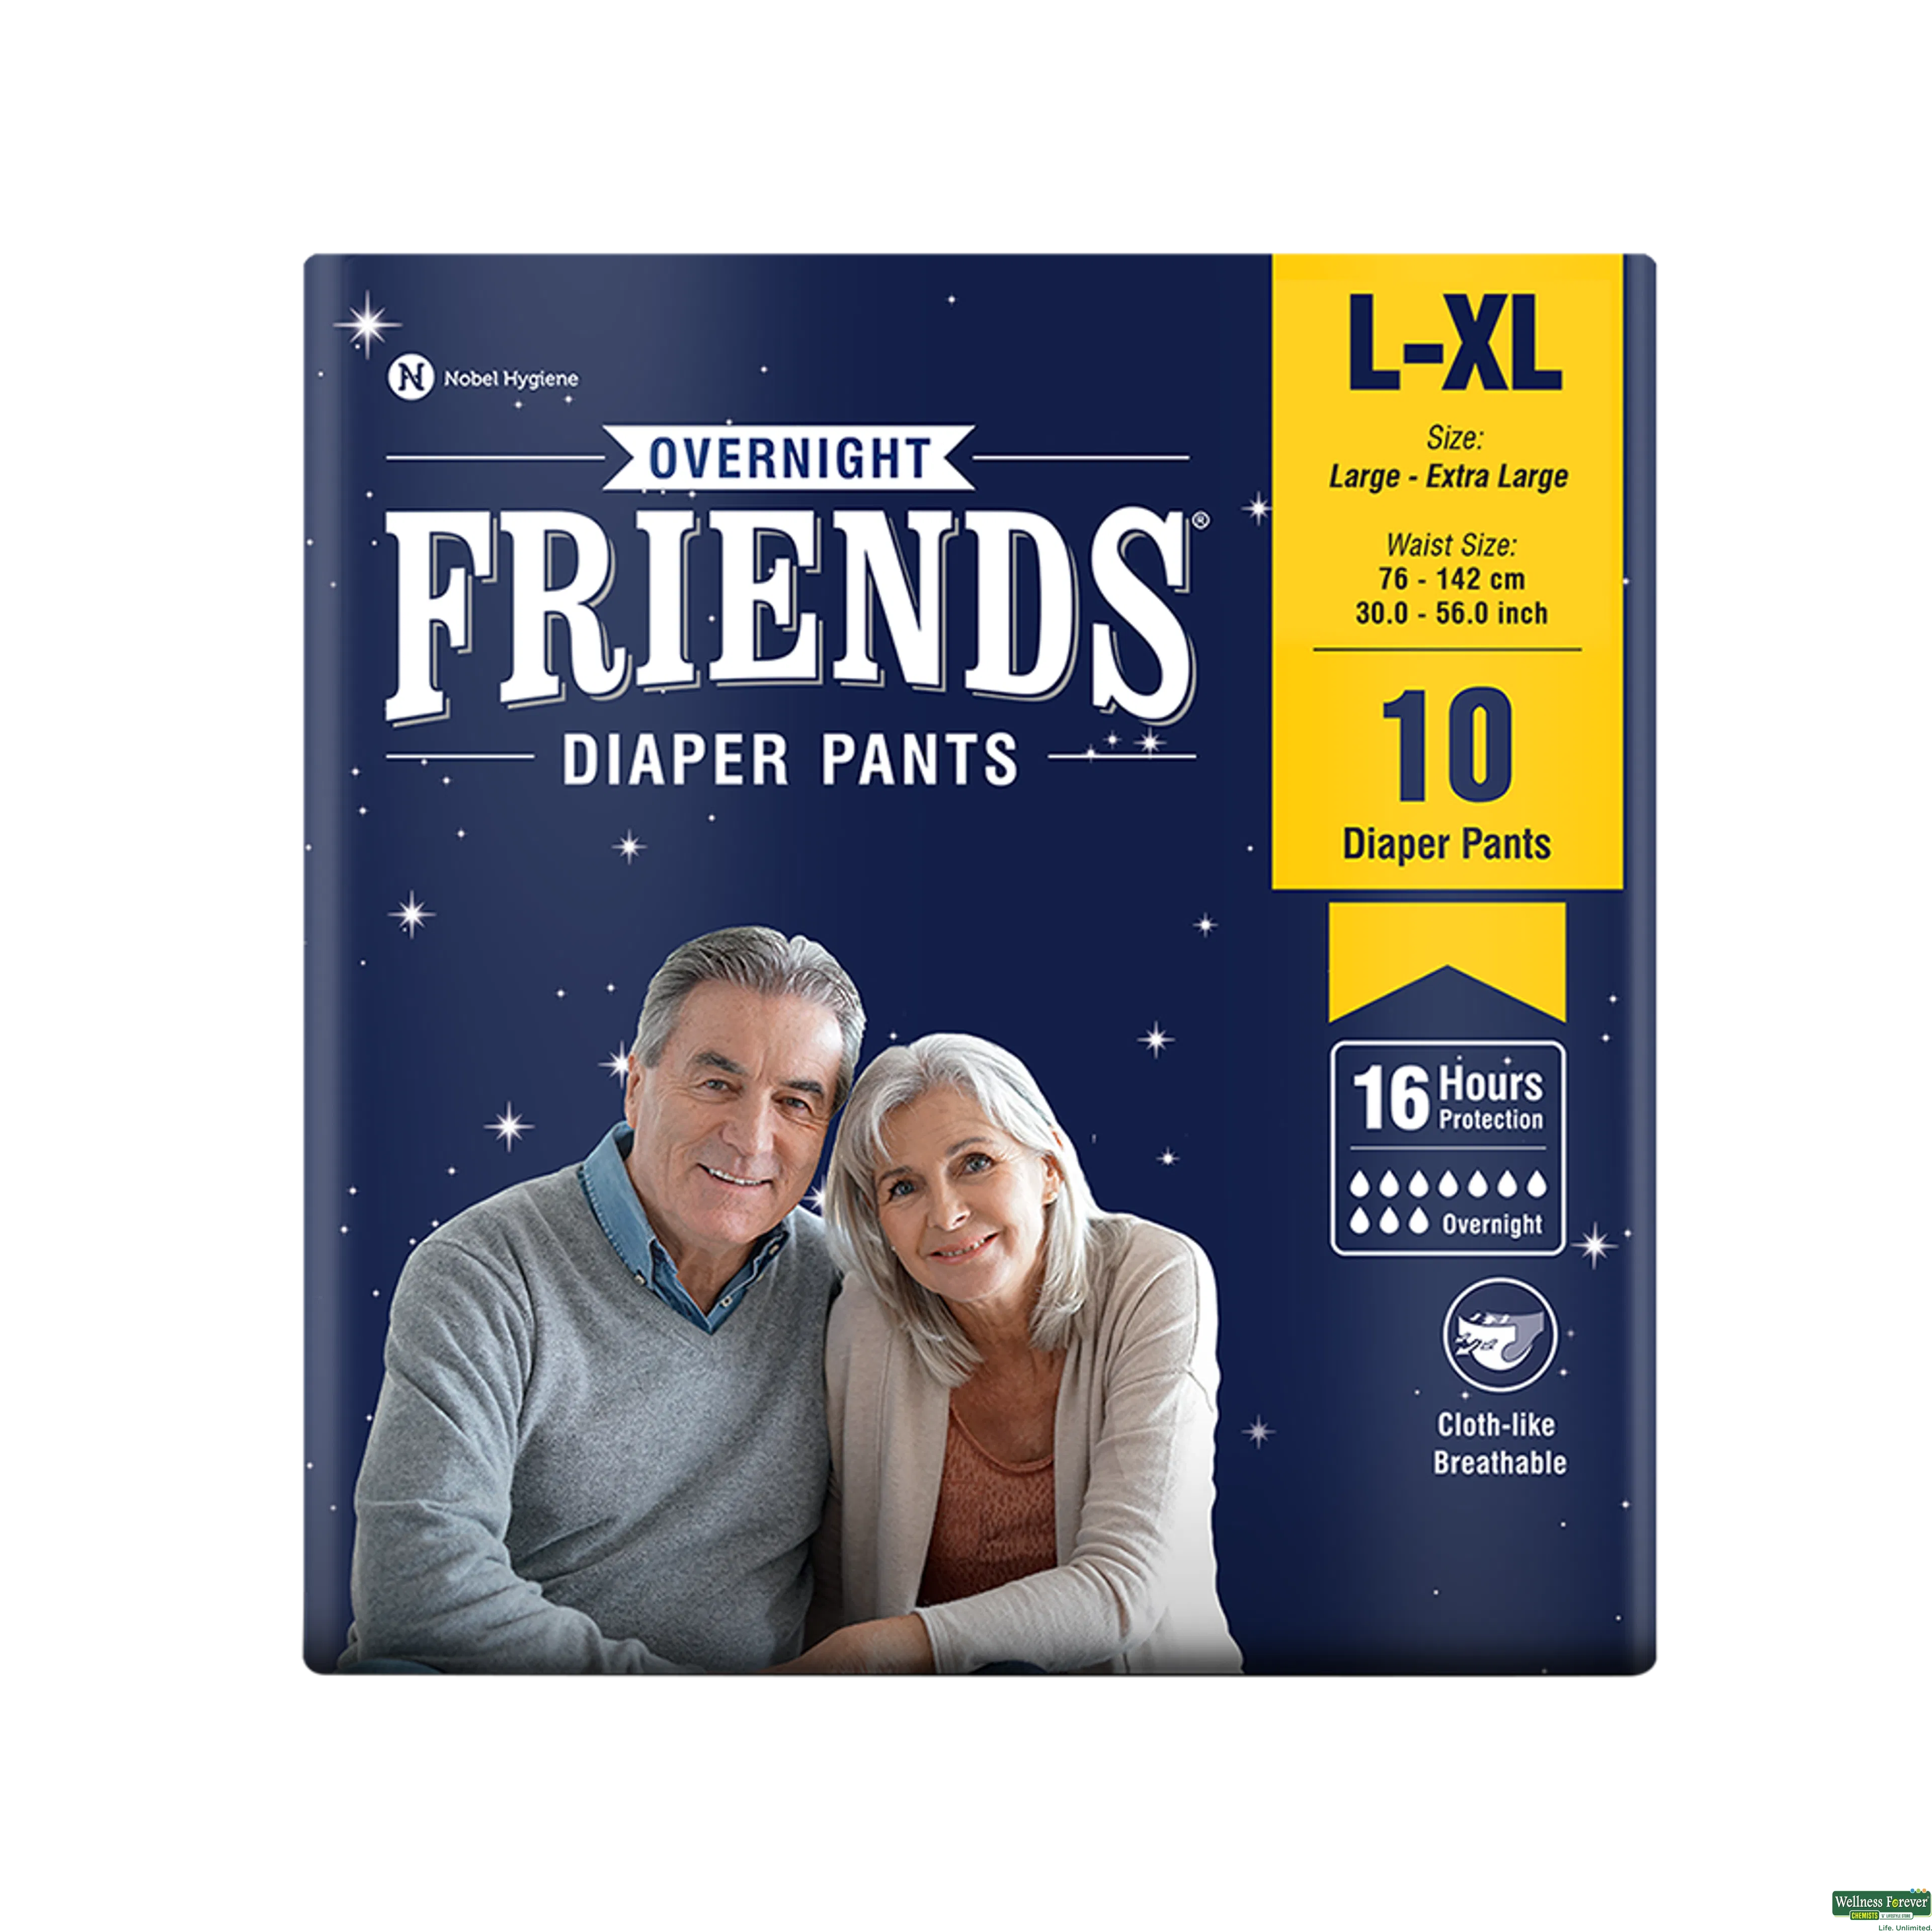 FRIENDS Premium Pull Up Pant Adult Diapers - XL - XXL - Price History